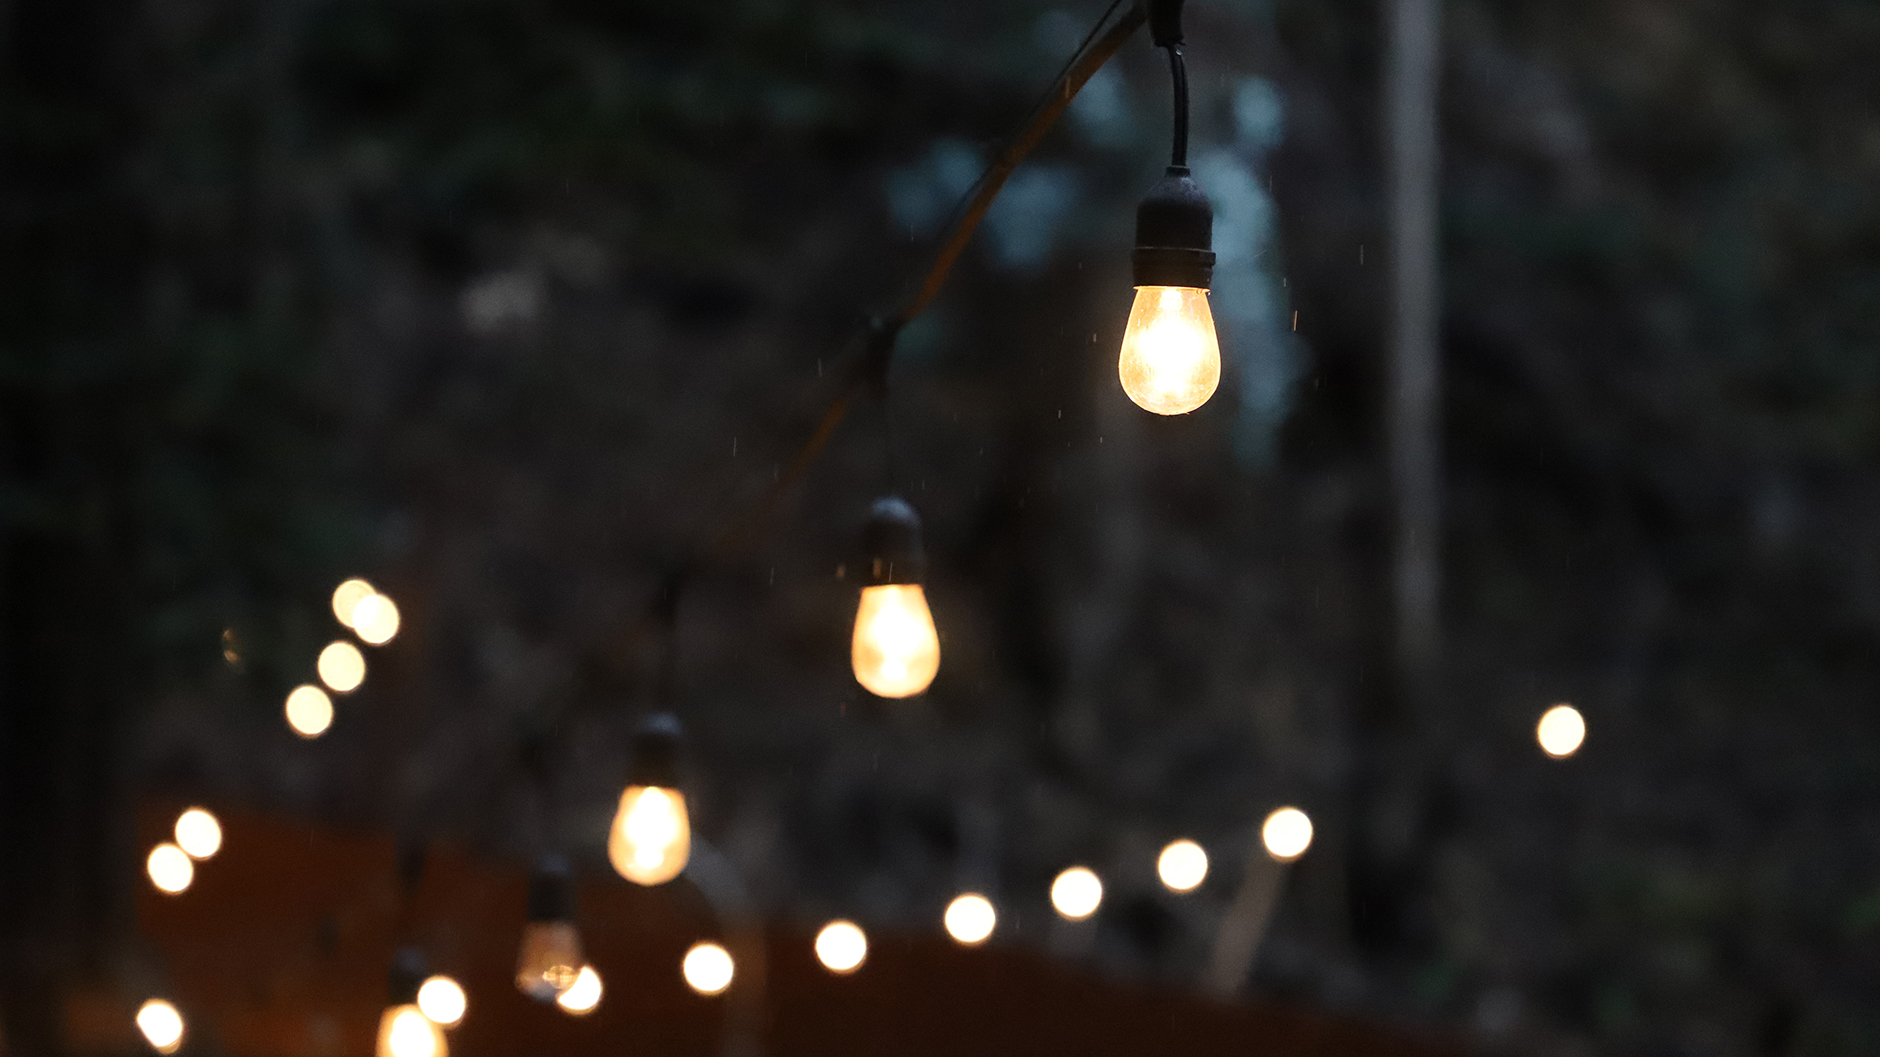 Strings of Edison lights strung from trees lighting a yard at night